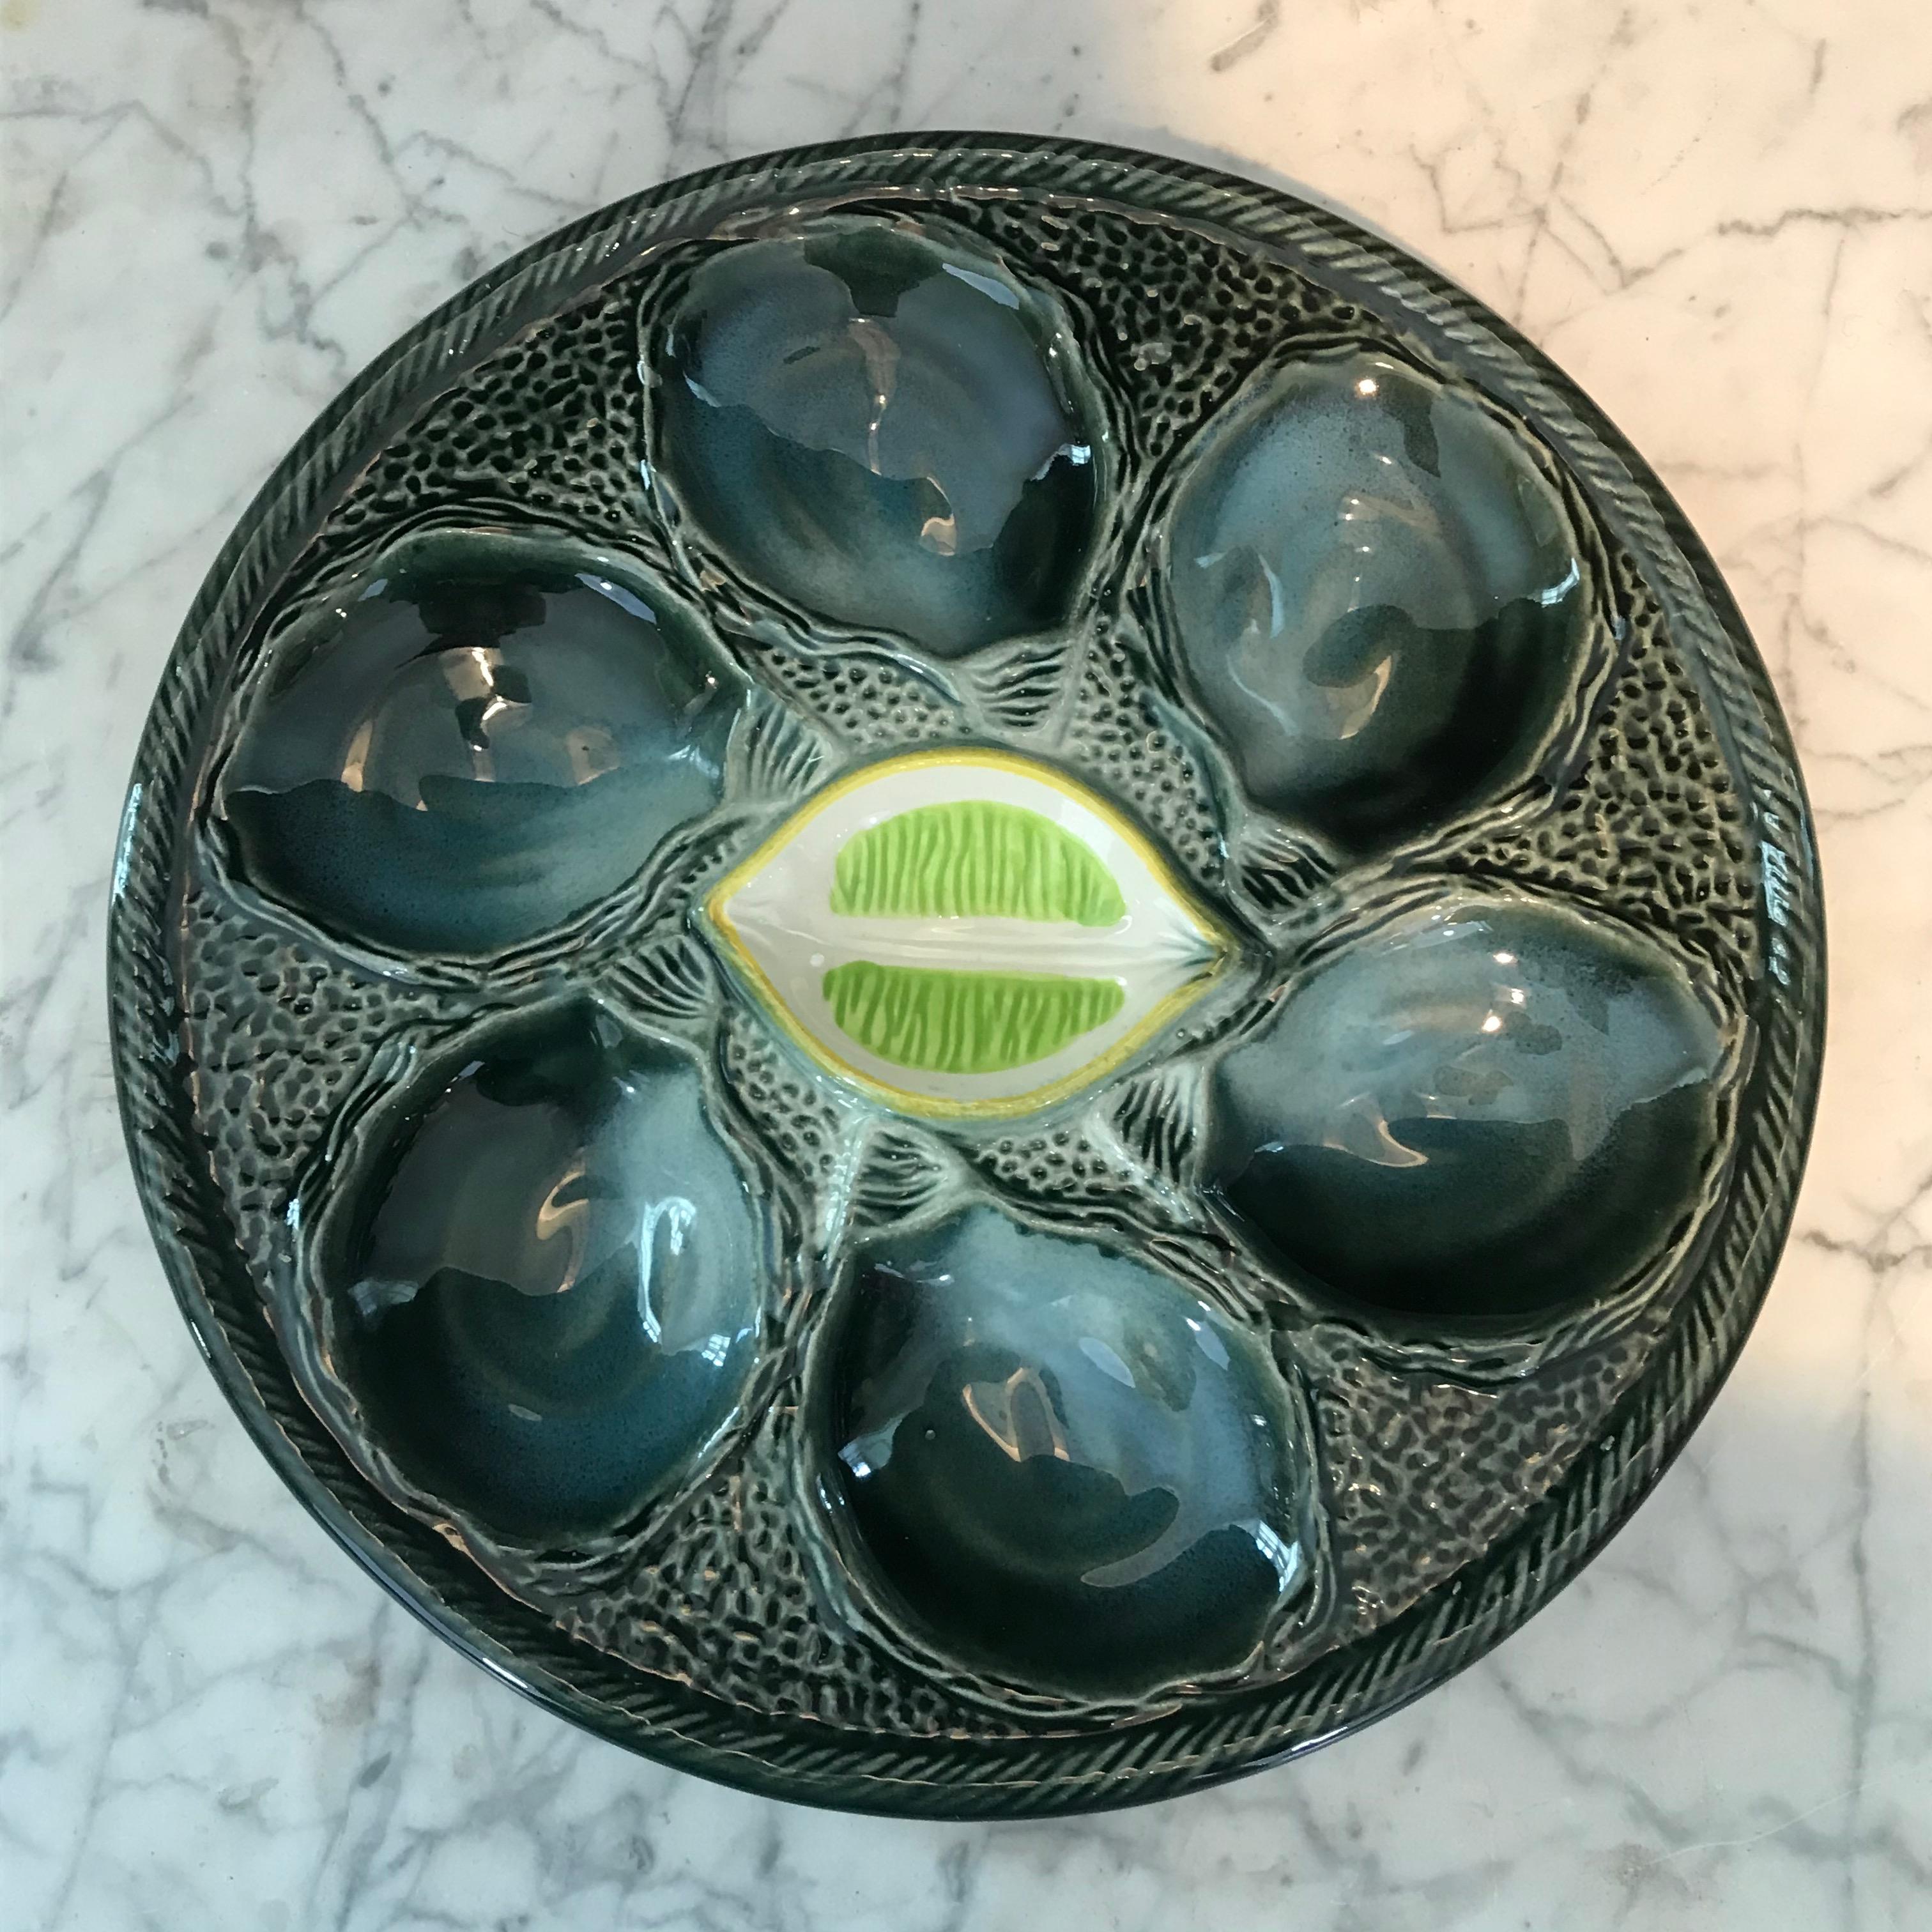 A wonderful set of 6 St. Clement vintage French Majolica oyster plates having indentations for the oysters and a real looking slice of yellow lemon in the centers.